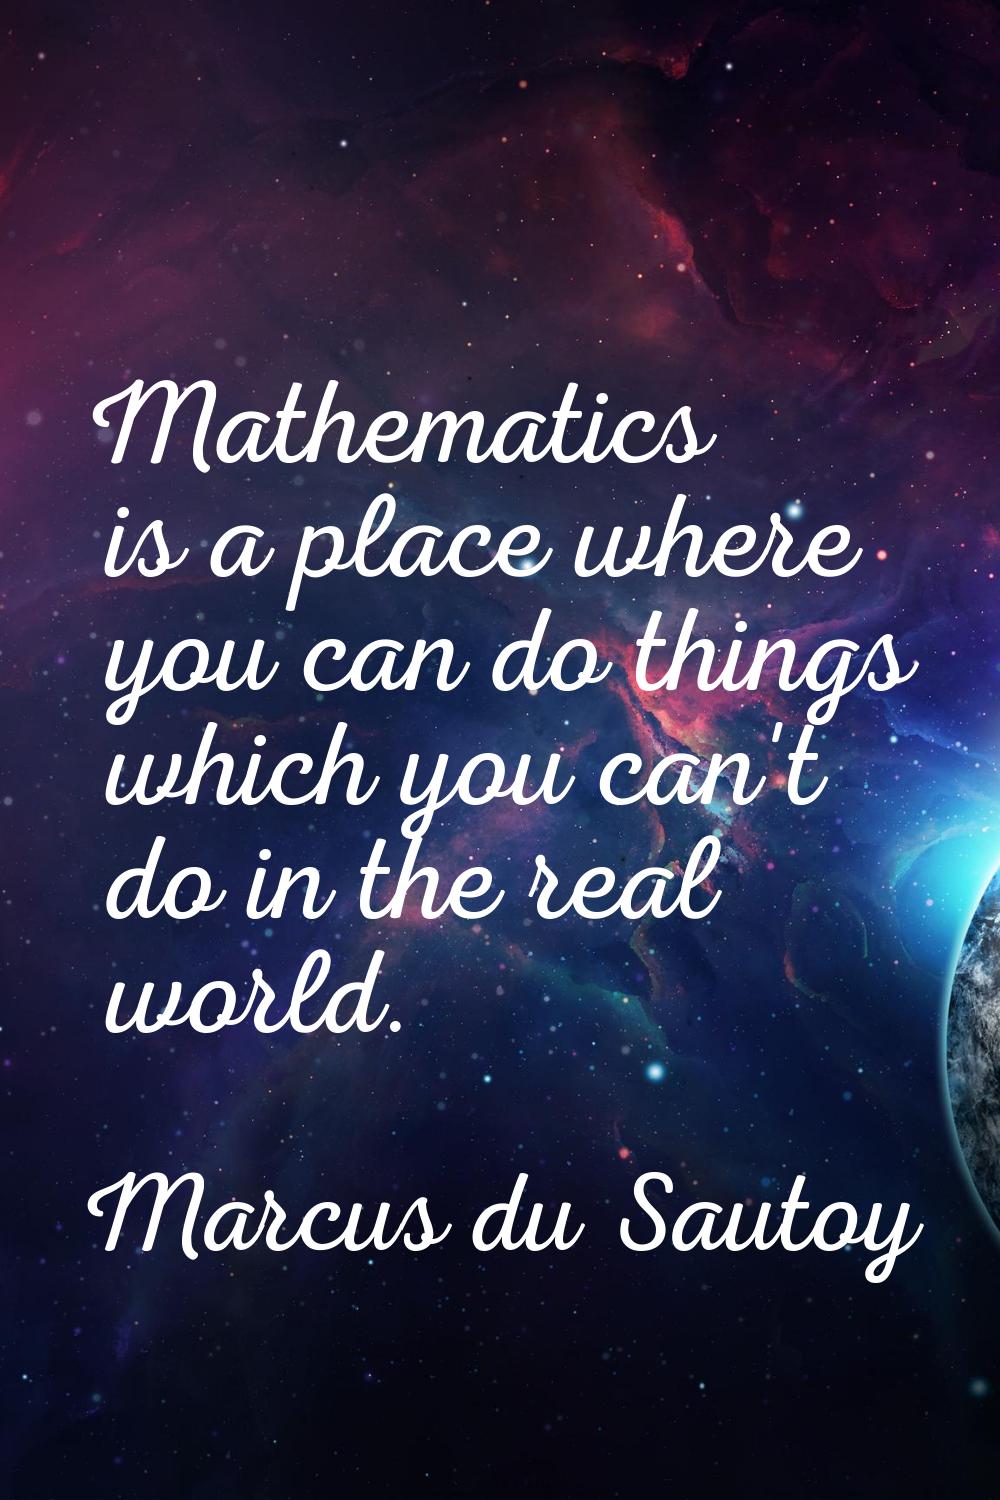 Mathematics is a place where you can do things which you can't do in the real world.